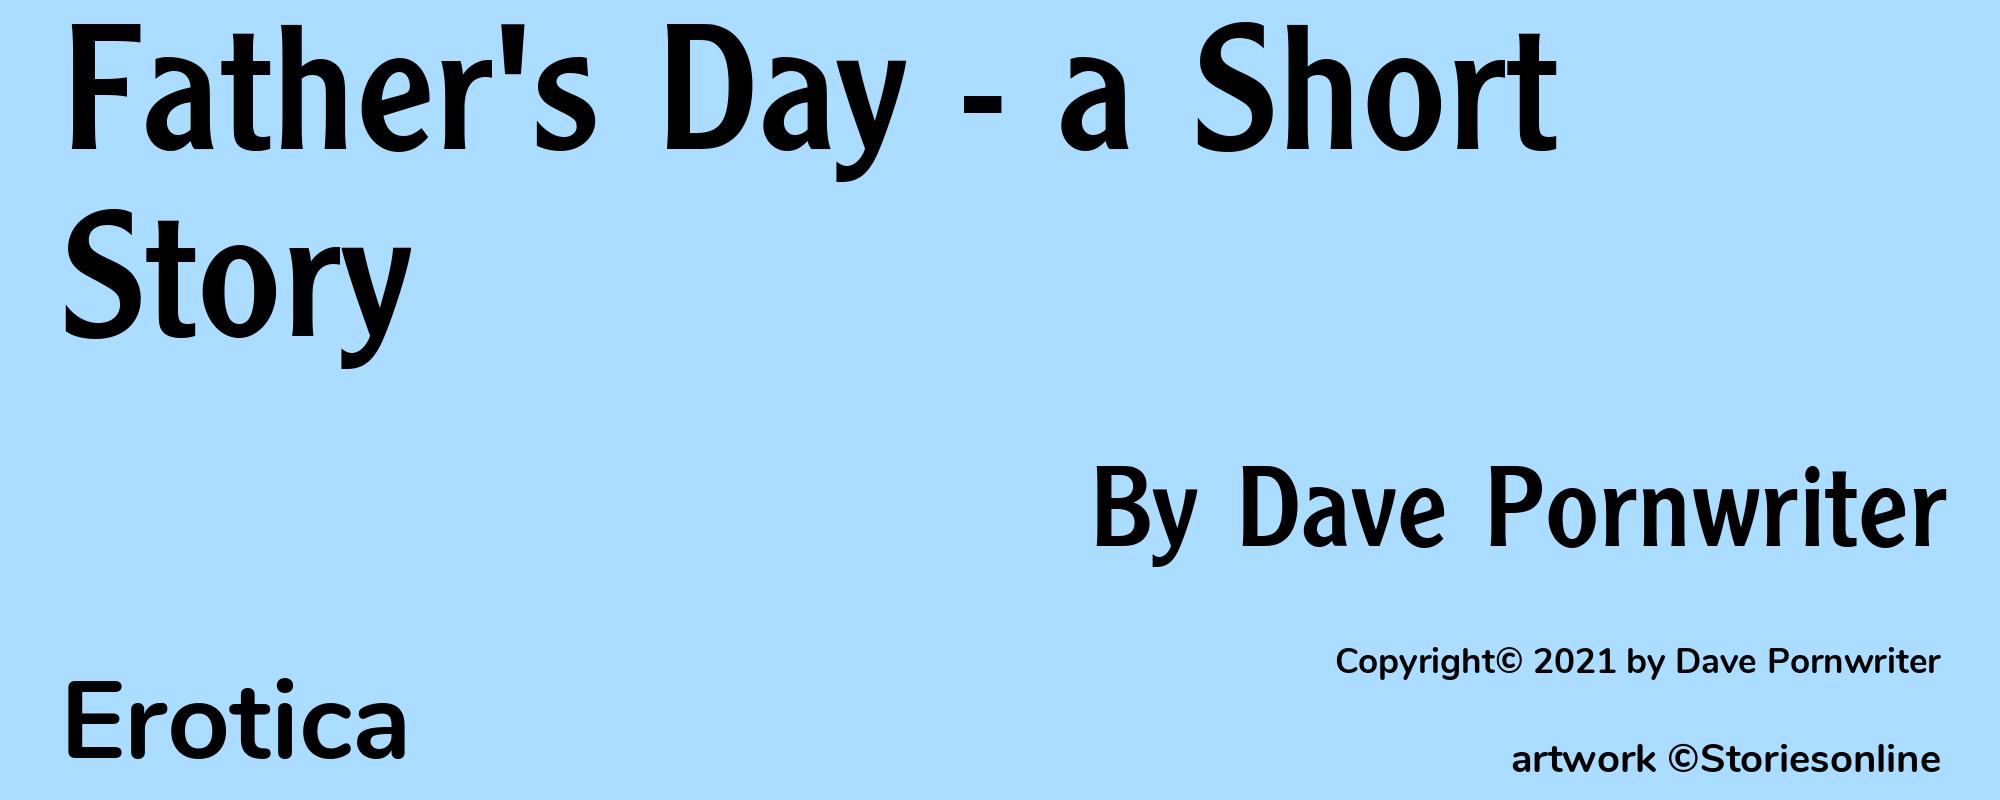 Father's Day - a Short Story - Cover